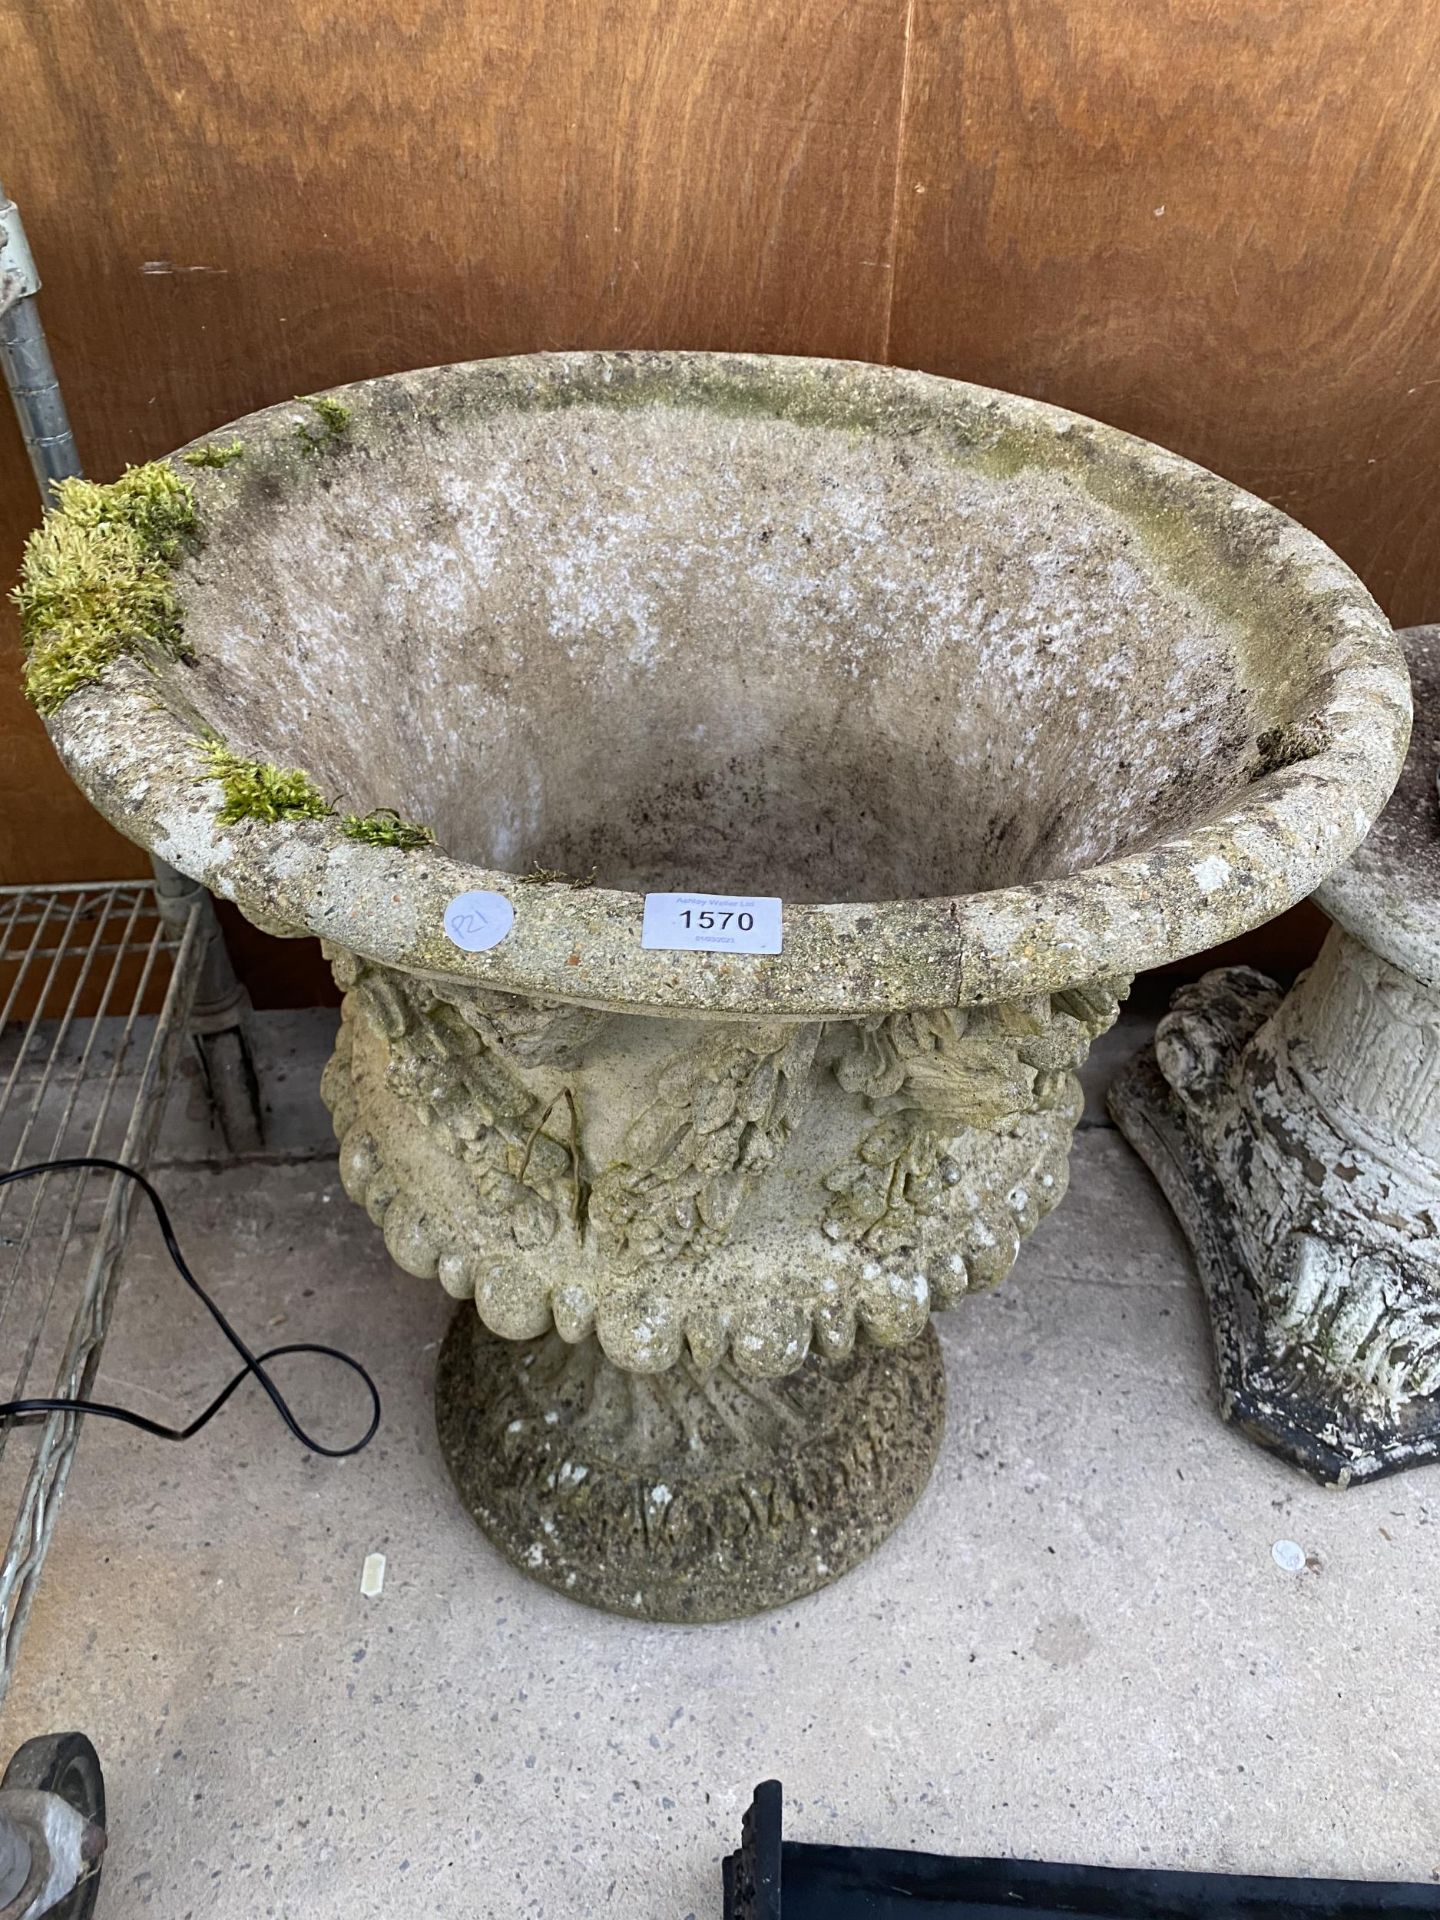 A LARGE RECONSTITUTED STONE URN PLANTER